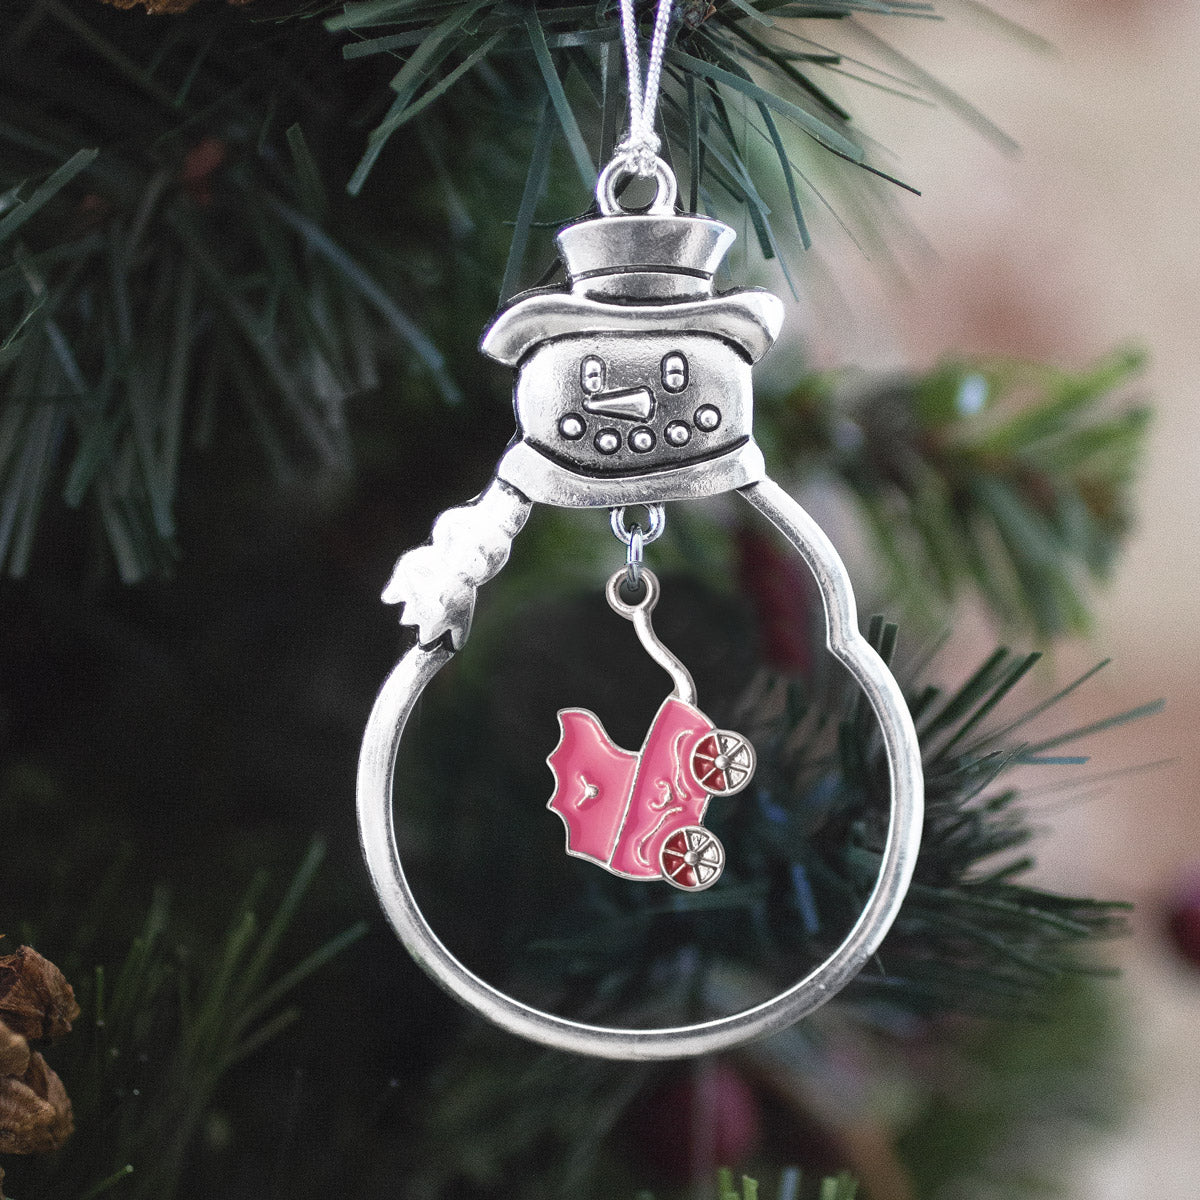 Pink Stroller Charm Christmas / Holiday Ornament